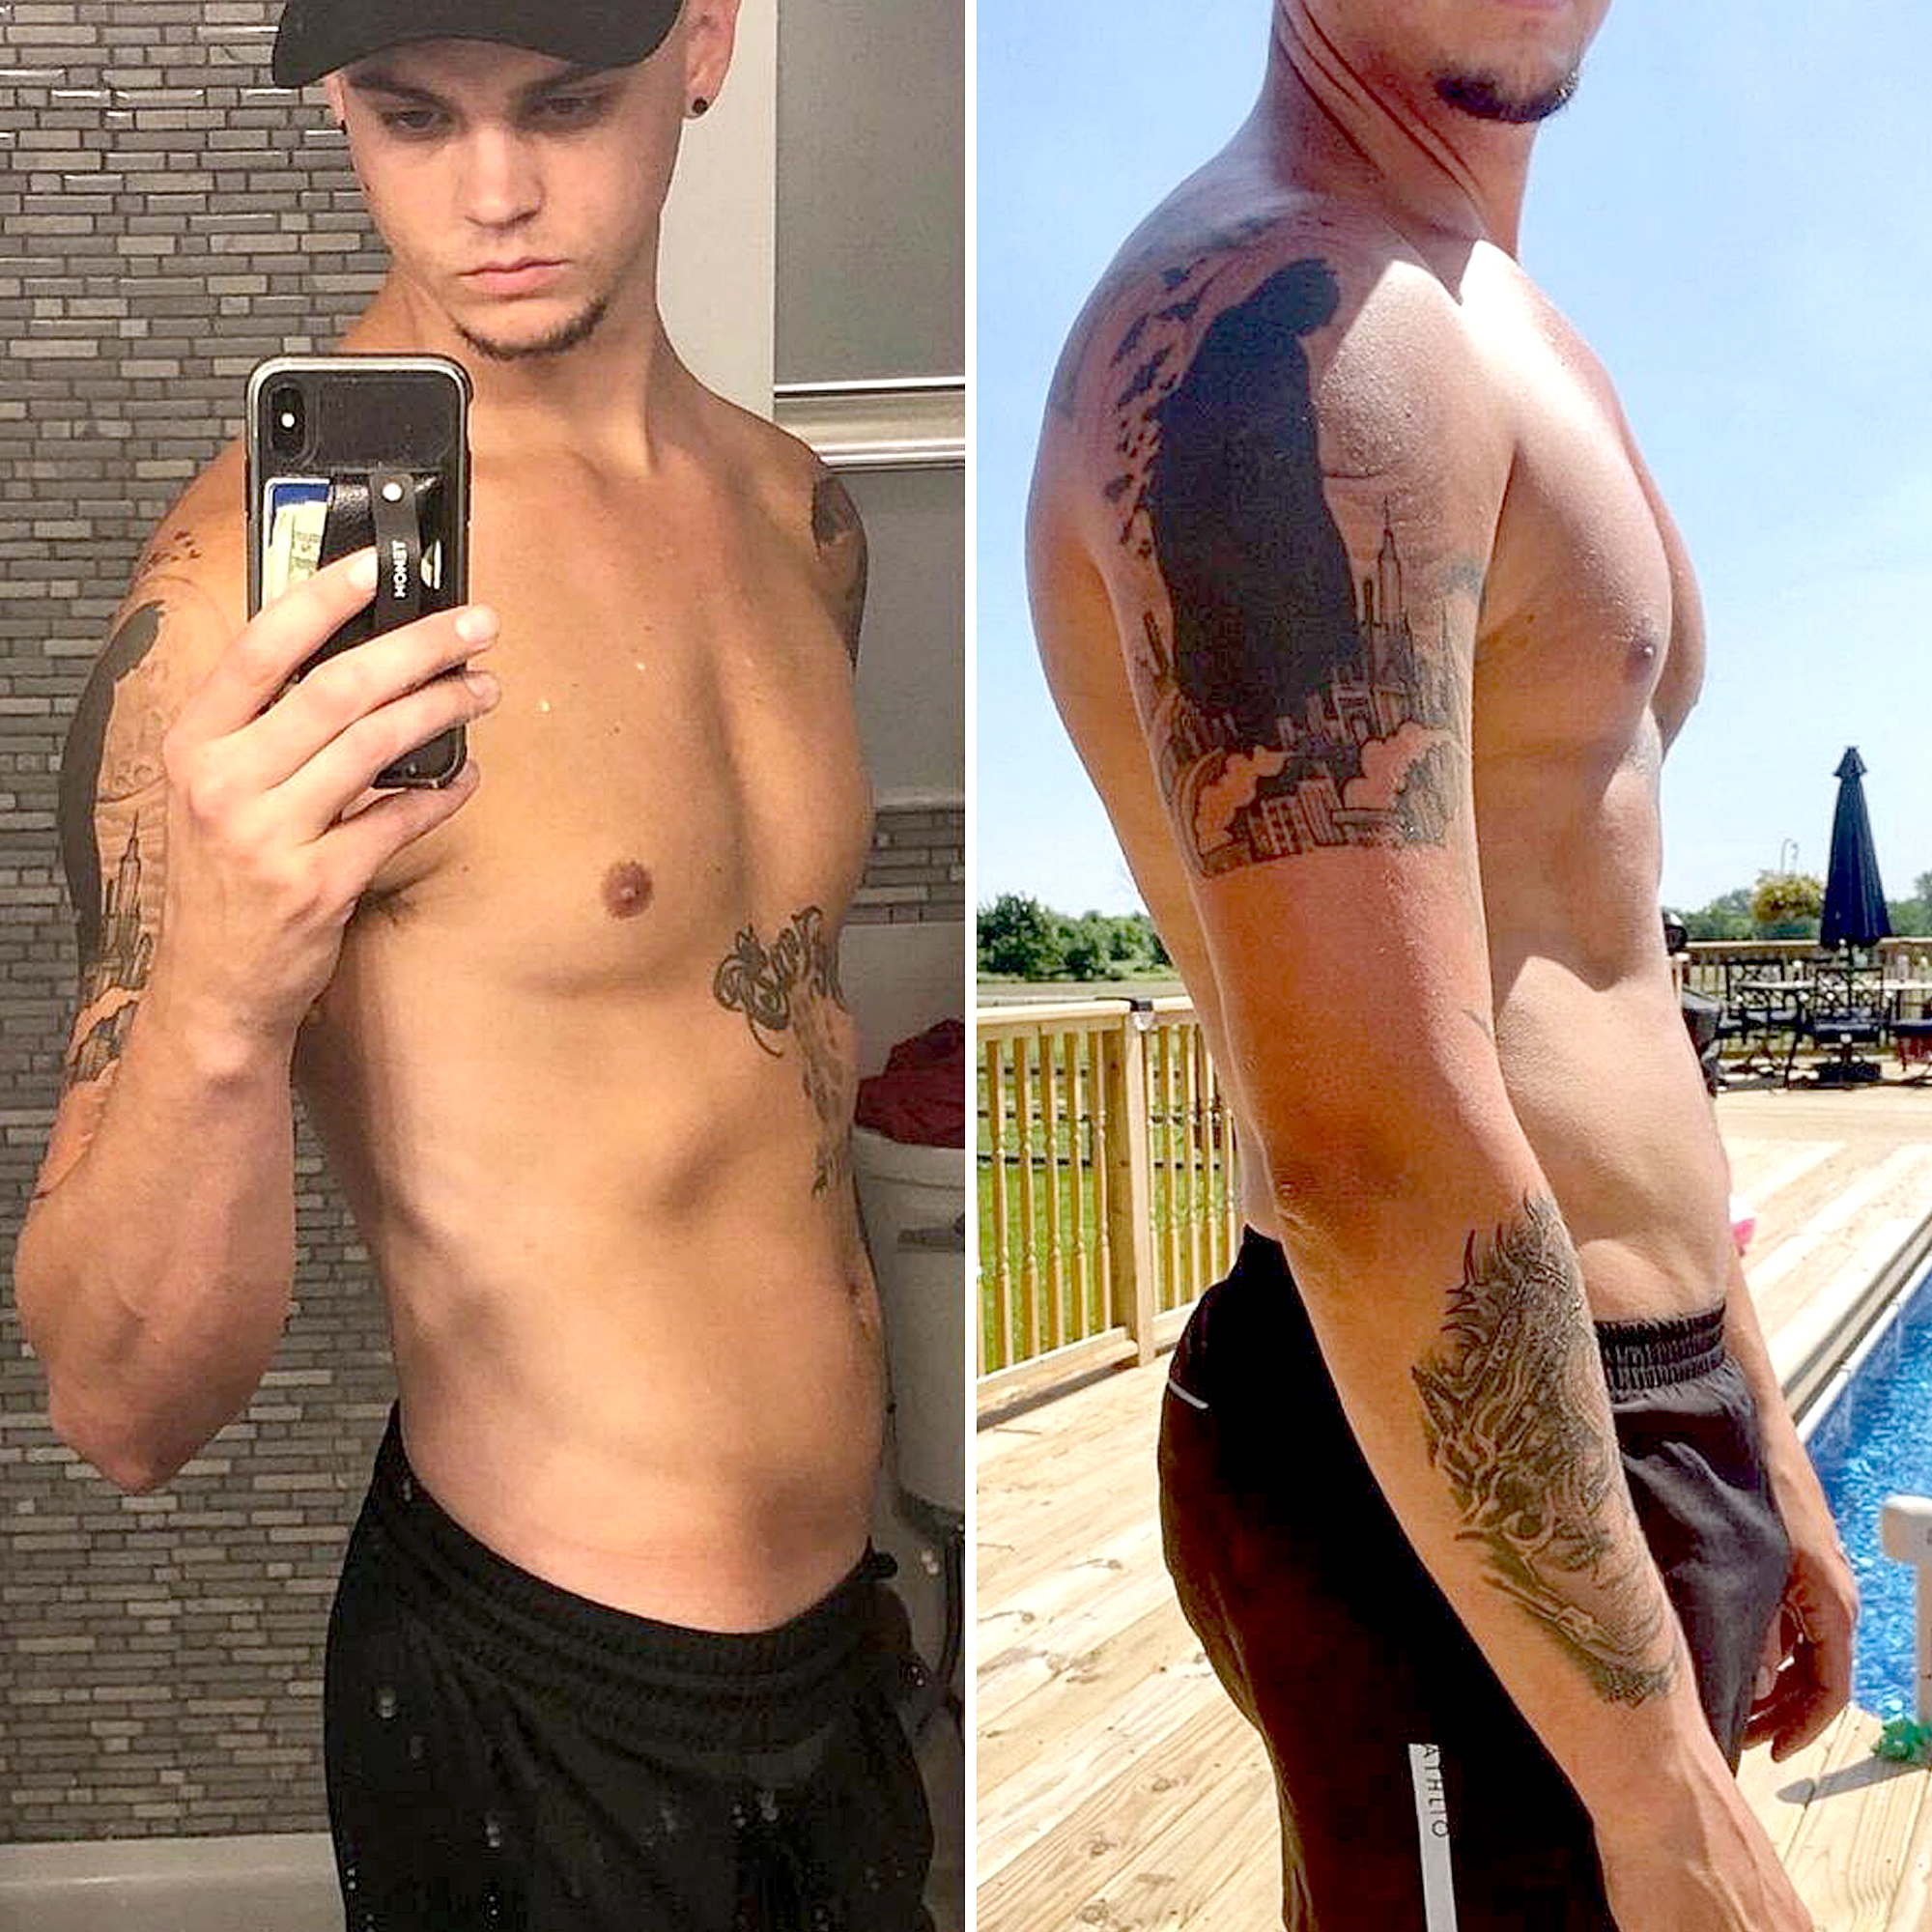 Teen Mom's Tyler Baltierra Shows Off Results of Fitness Journey